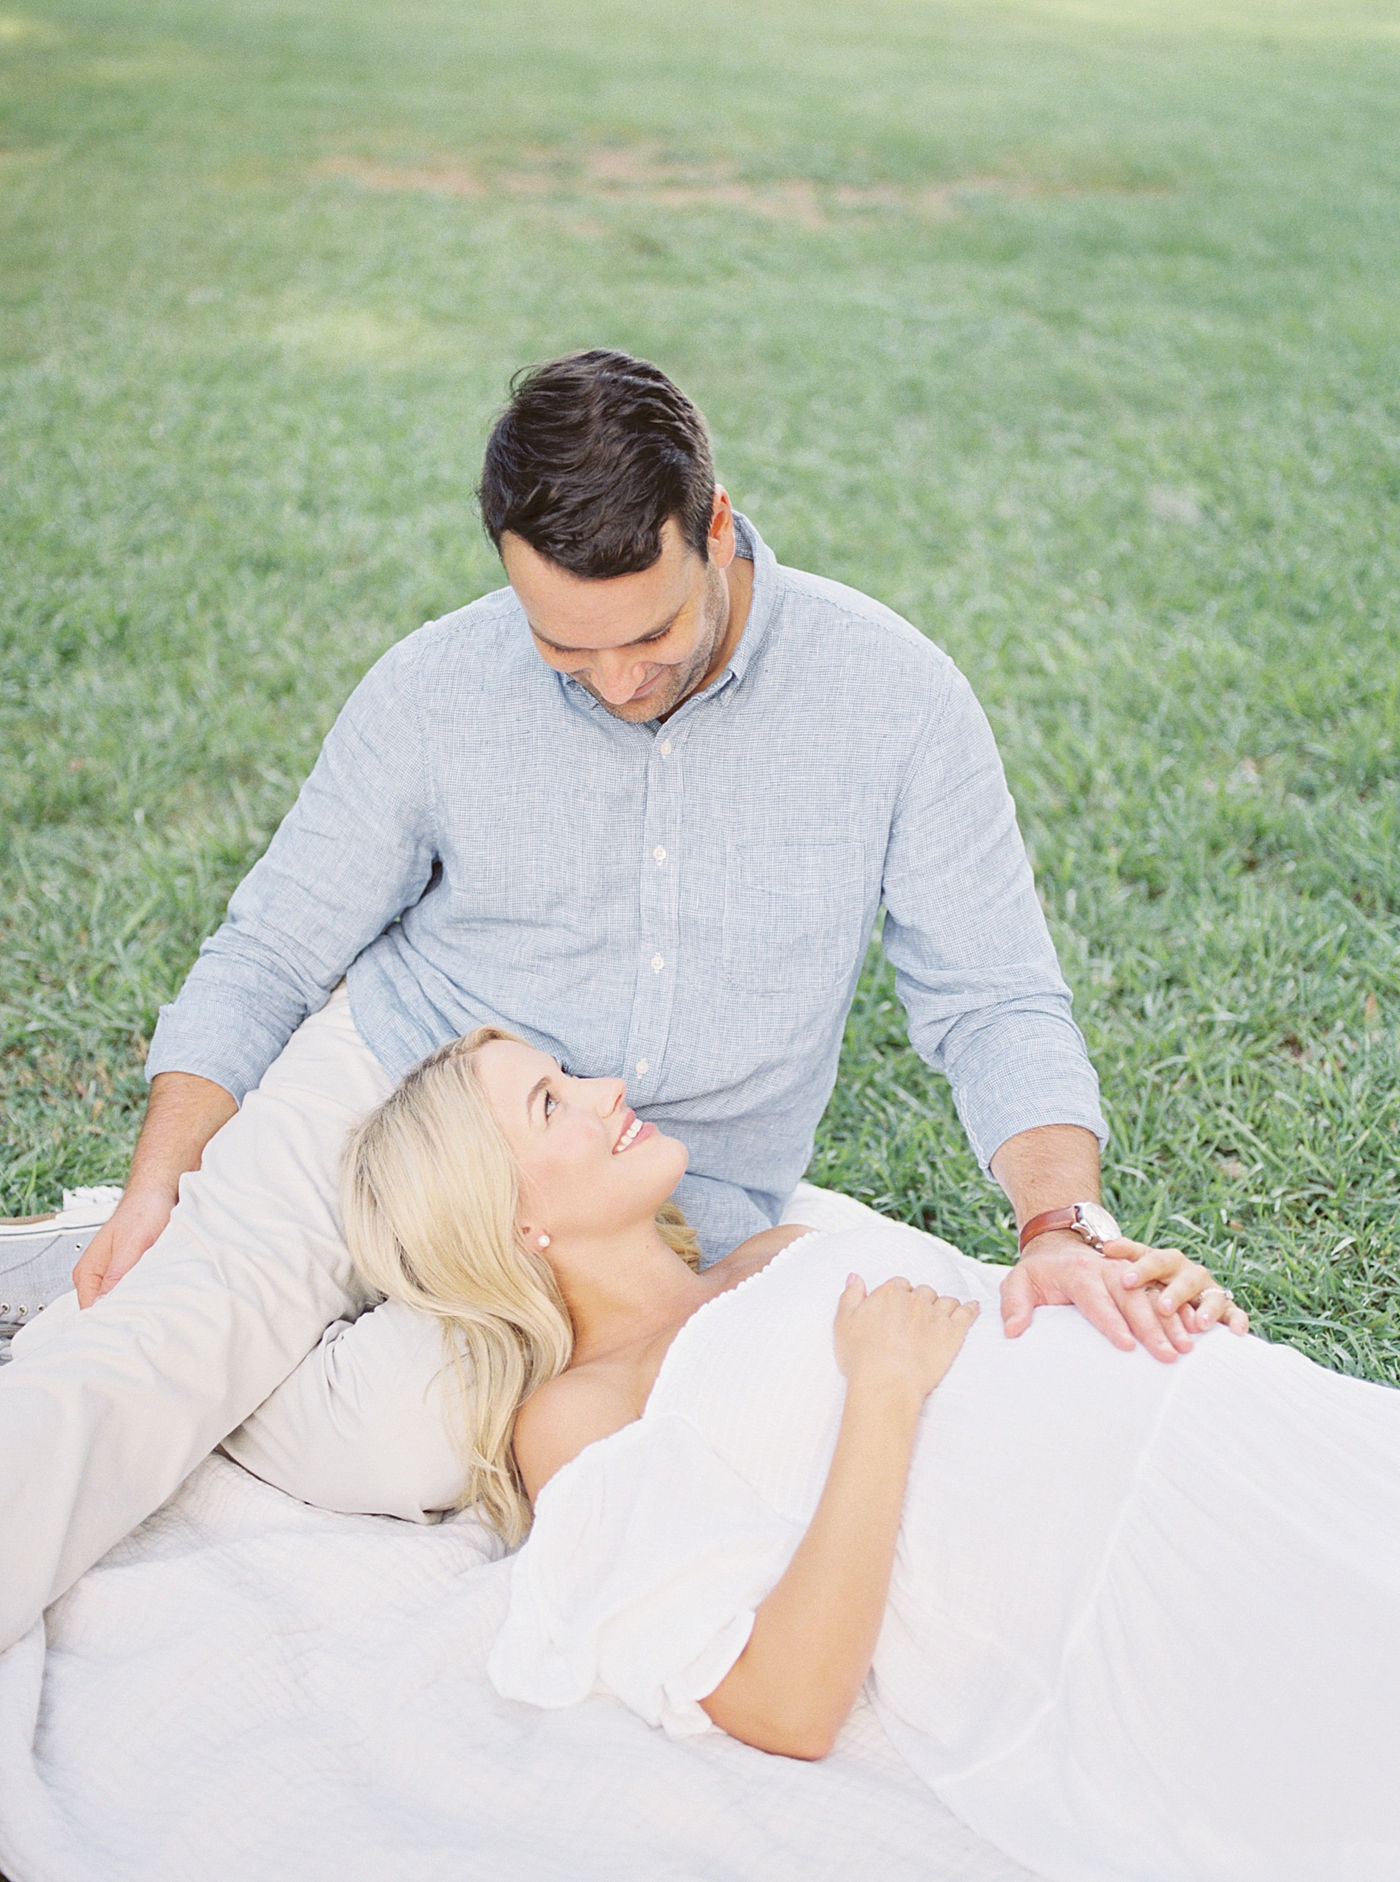 Mom and dad to be sitting in the grass in the park | Images by Caitlyn Motycka